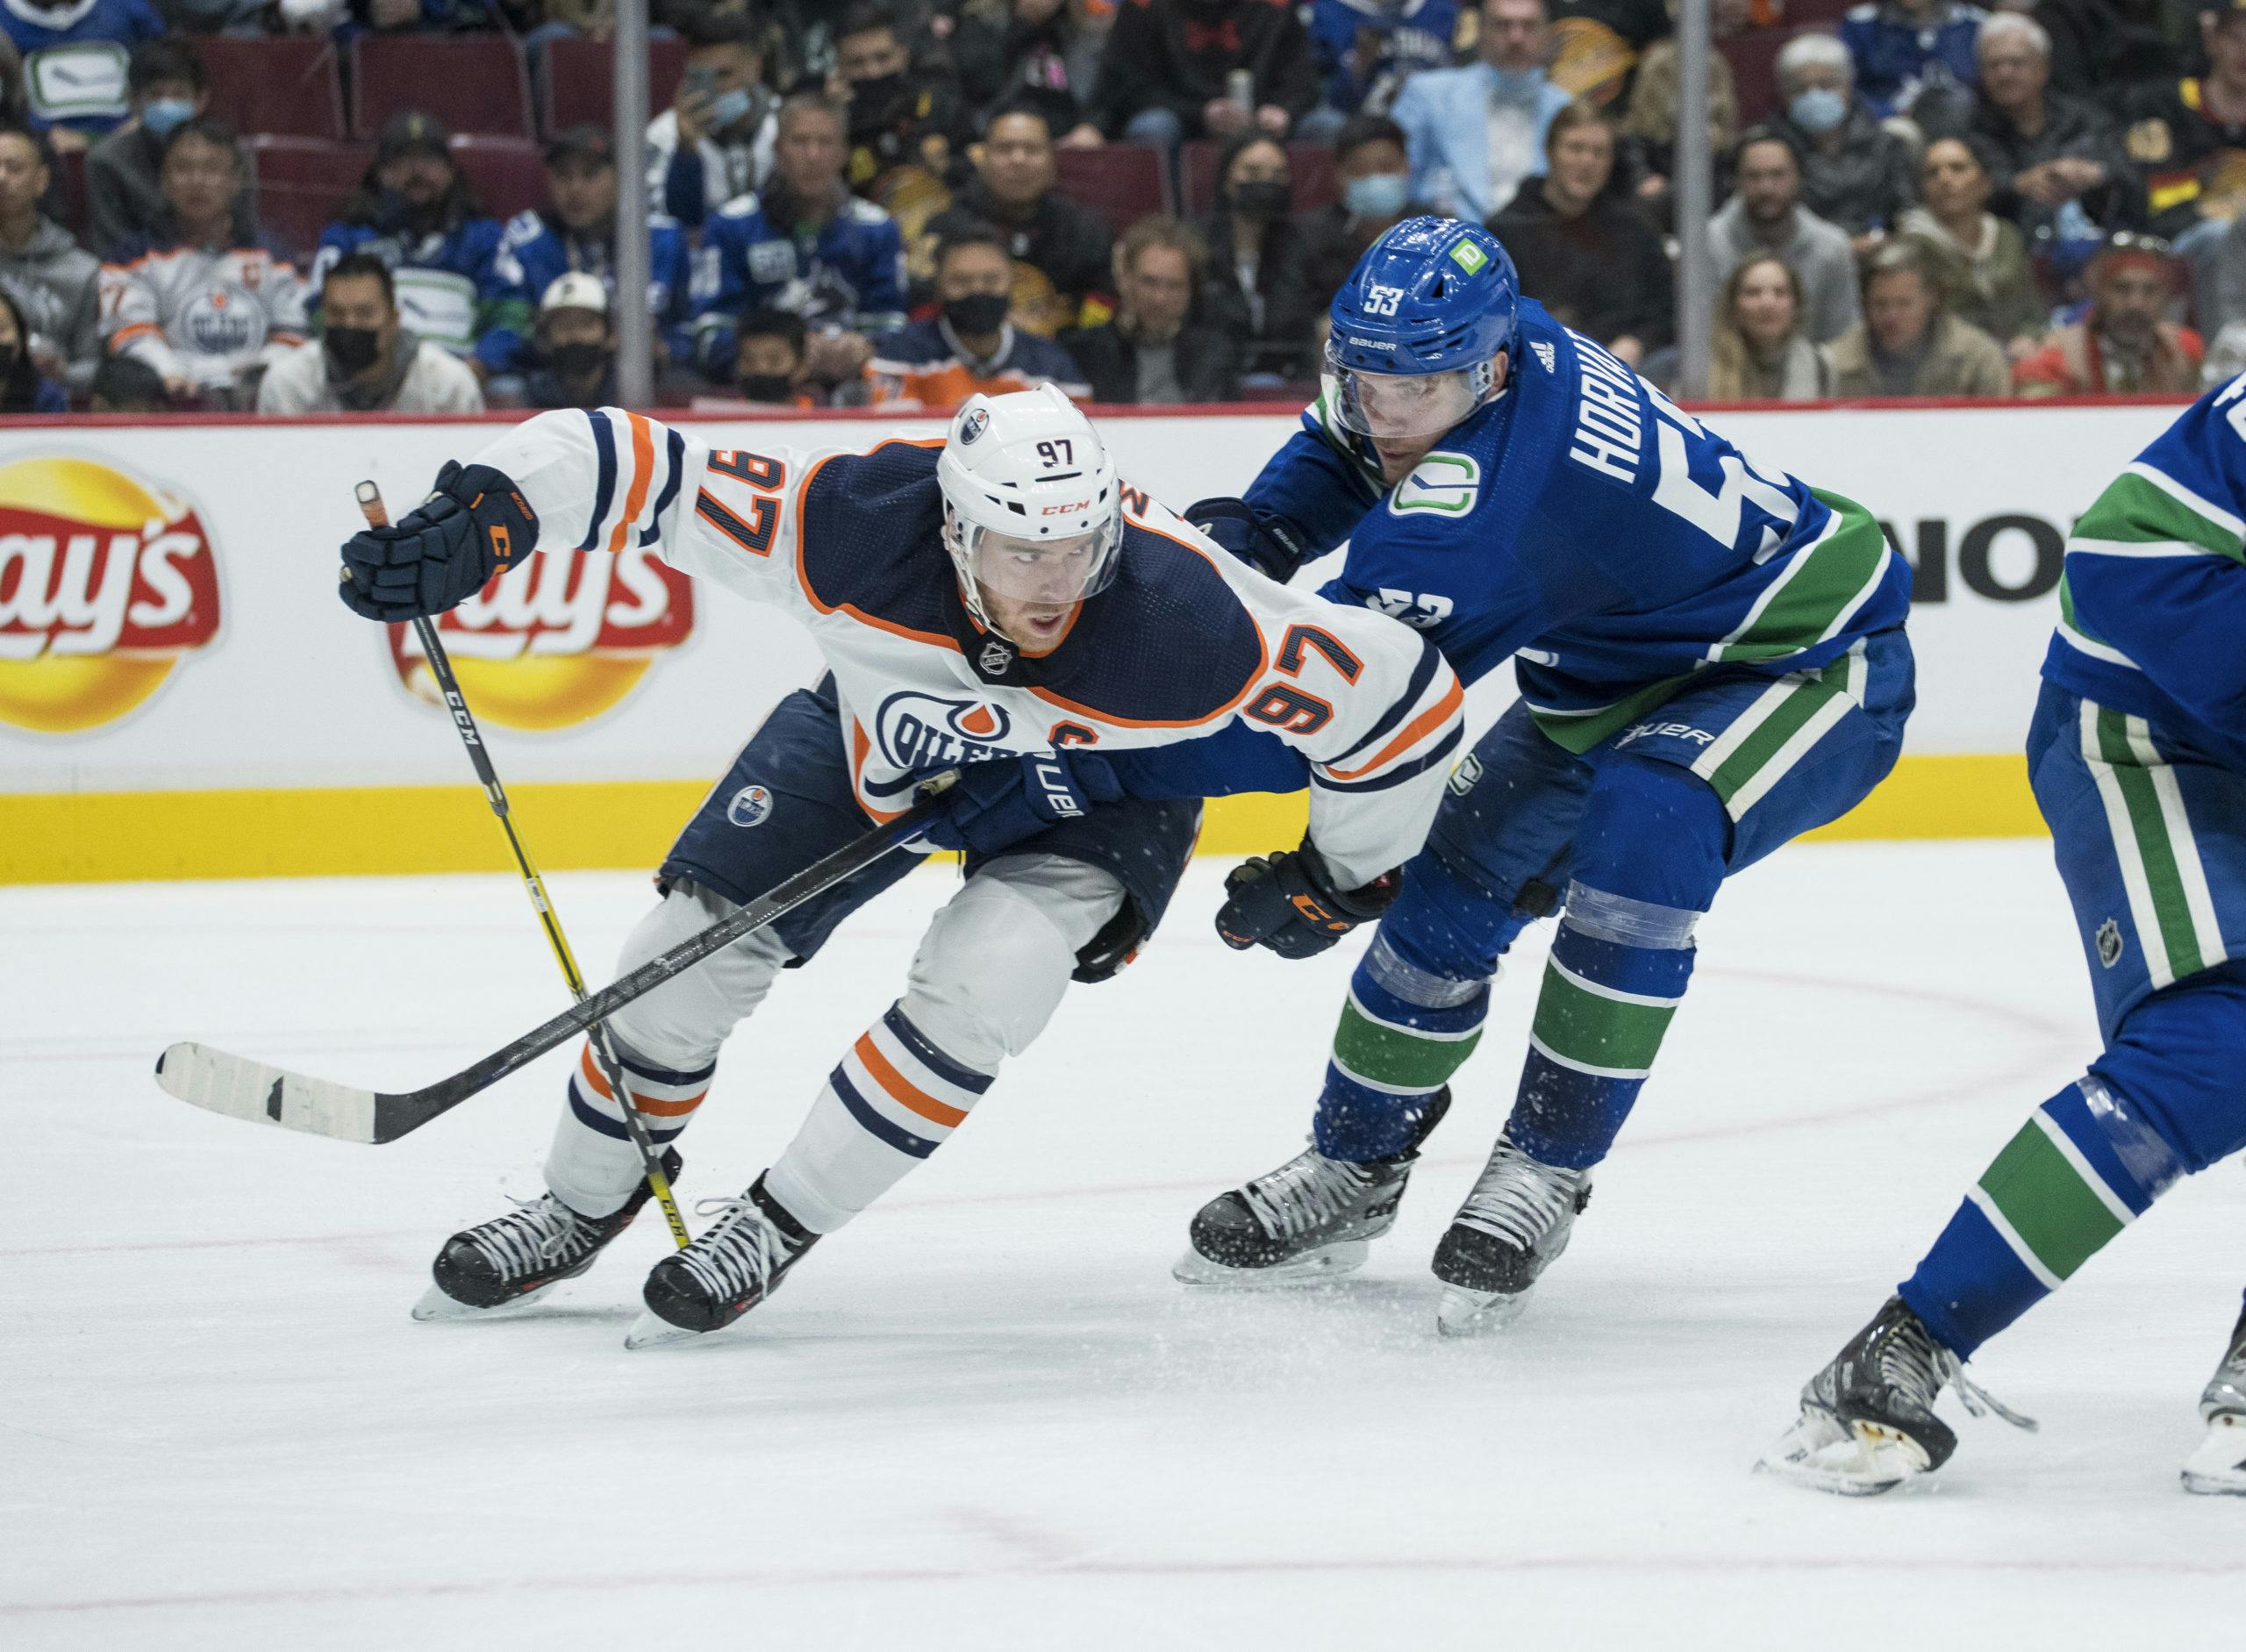 NHL Notebook Dylan Holloway skates with Edmonton Oilers, will the